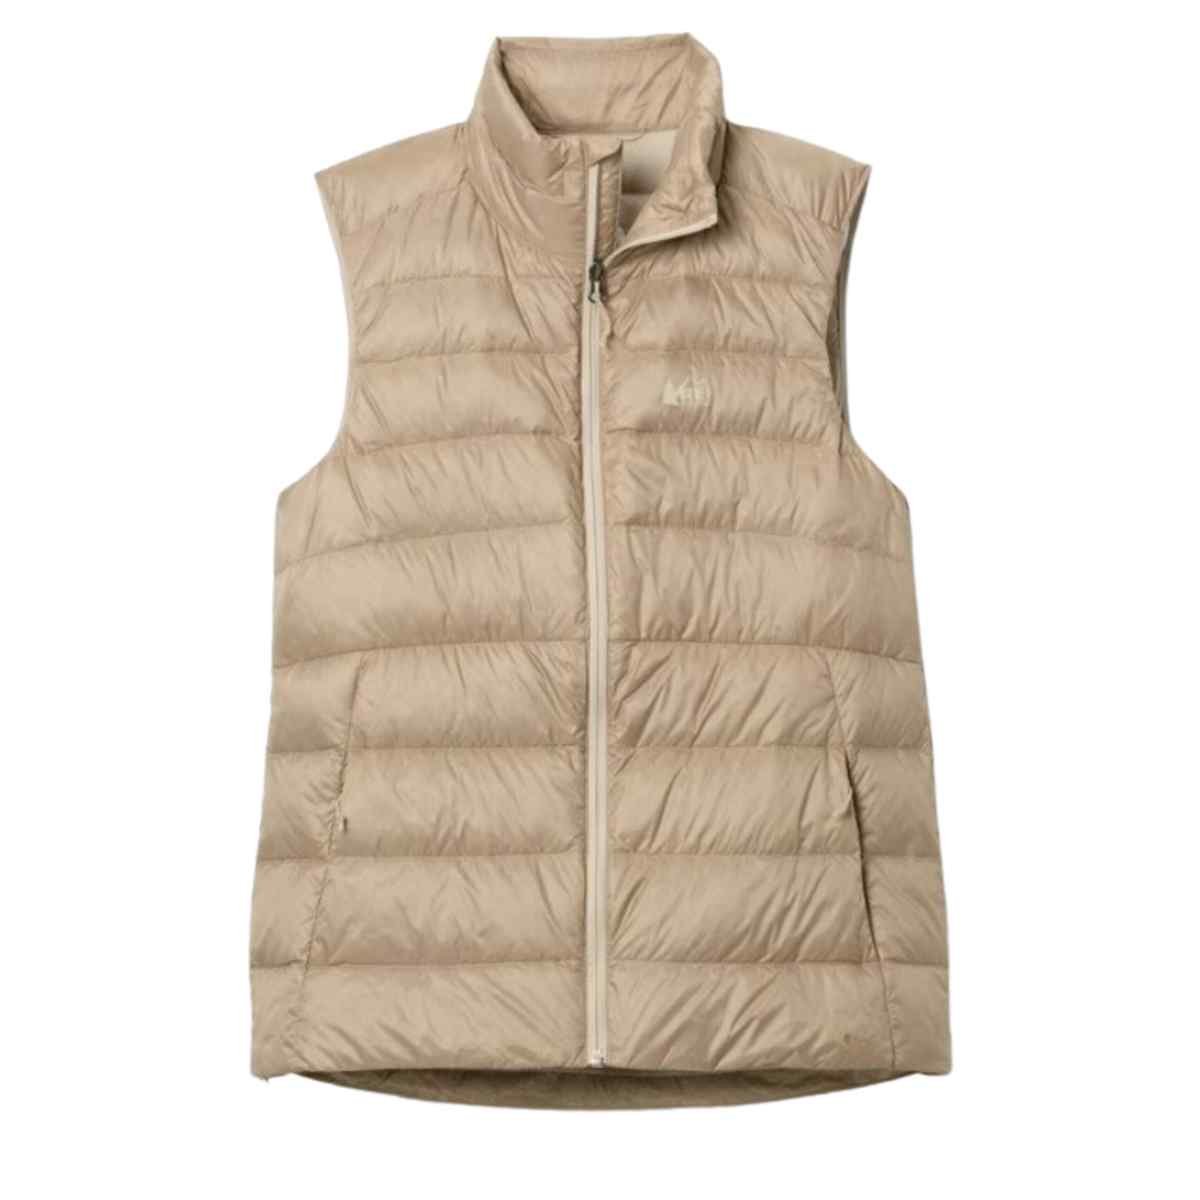 5 Women's Vests That are Ideal For In-Between Temperatures